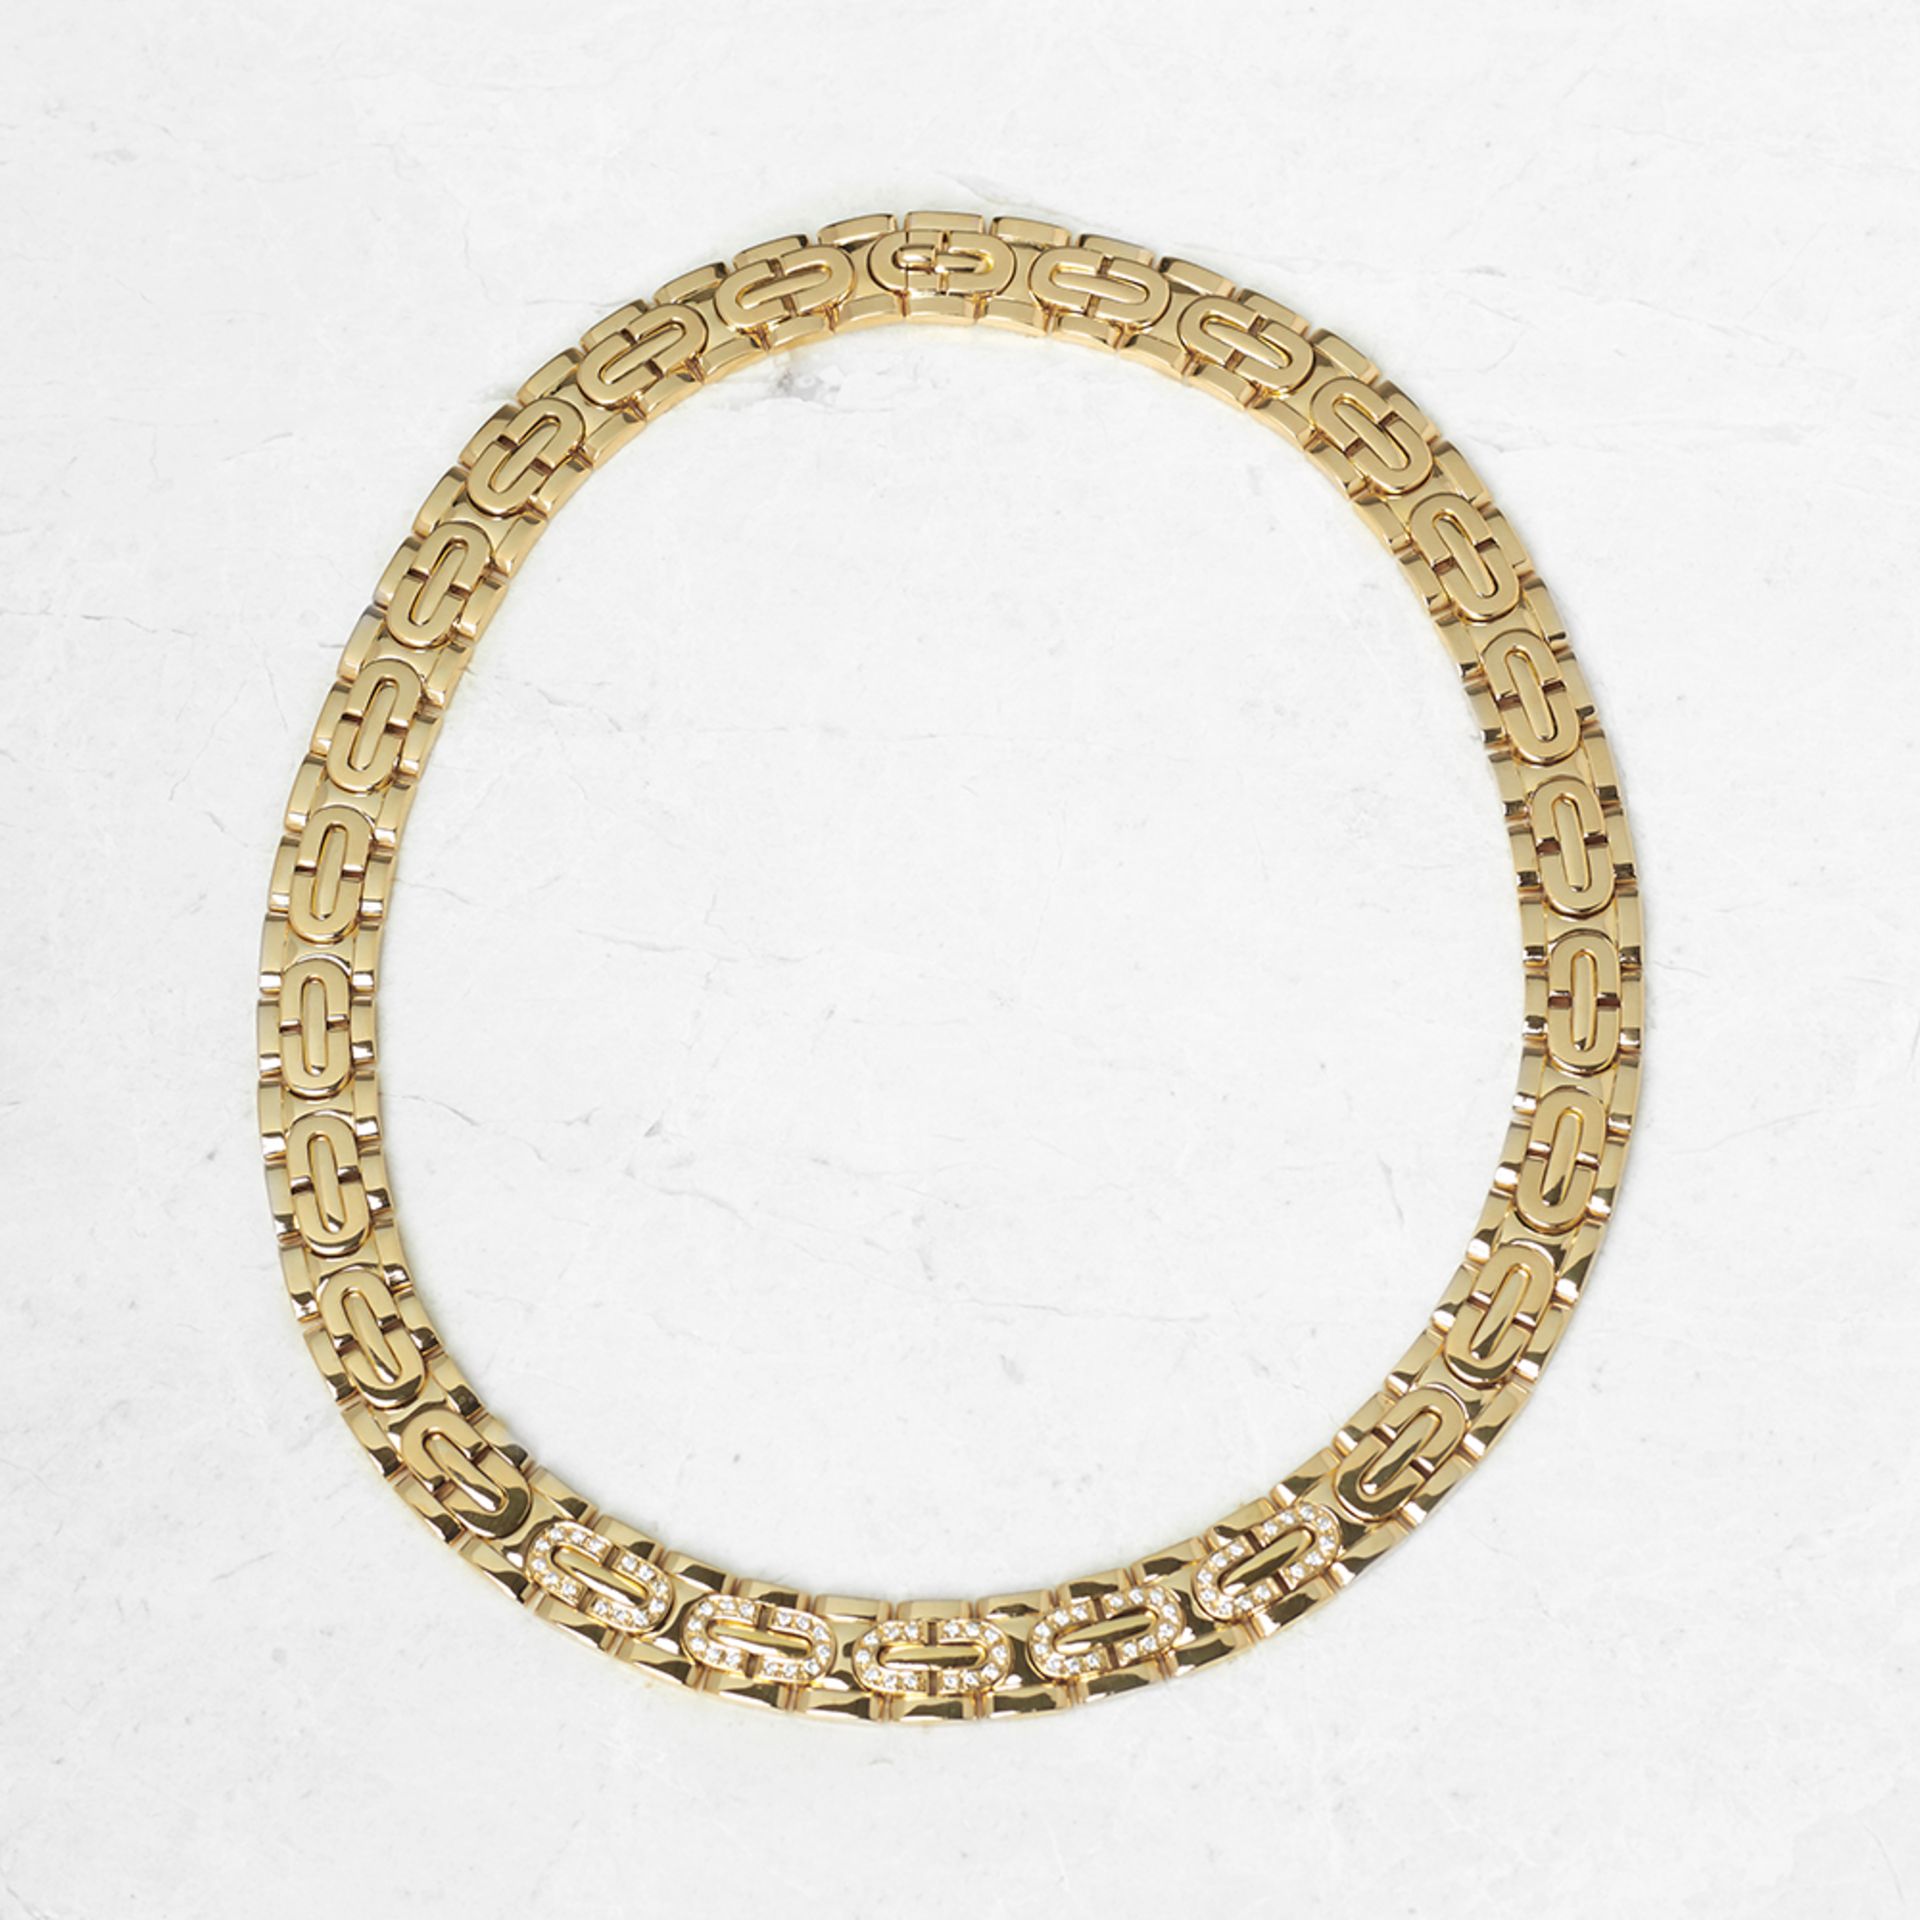 Cartier 18k Yellow Gold Oval Link Collar 0.70ct Diamond Maillon Necklace with Box, Certs & papers - Image 6 of 14